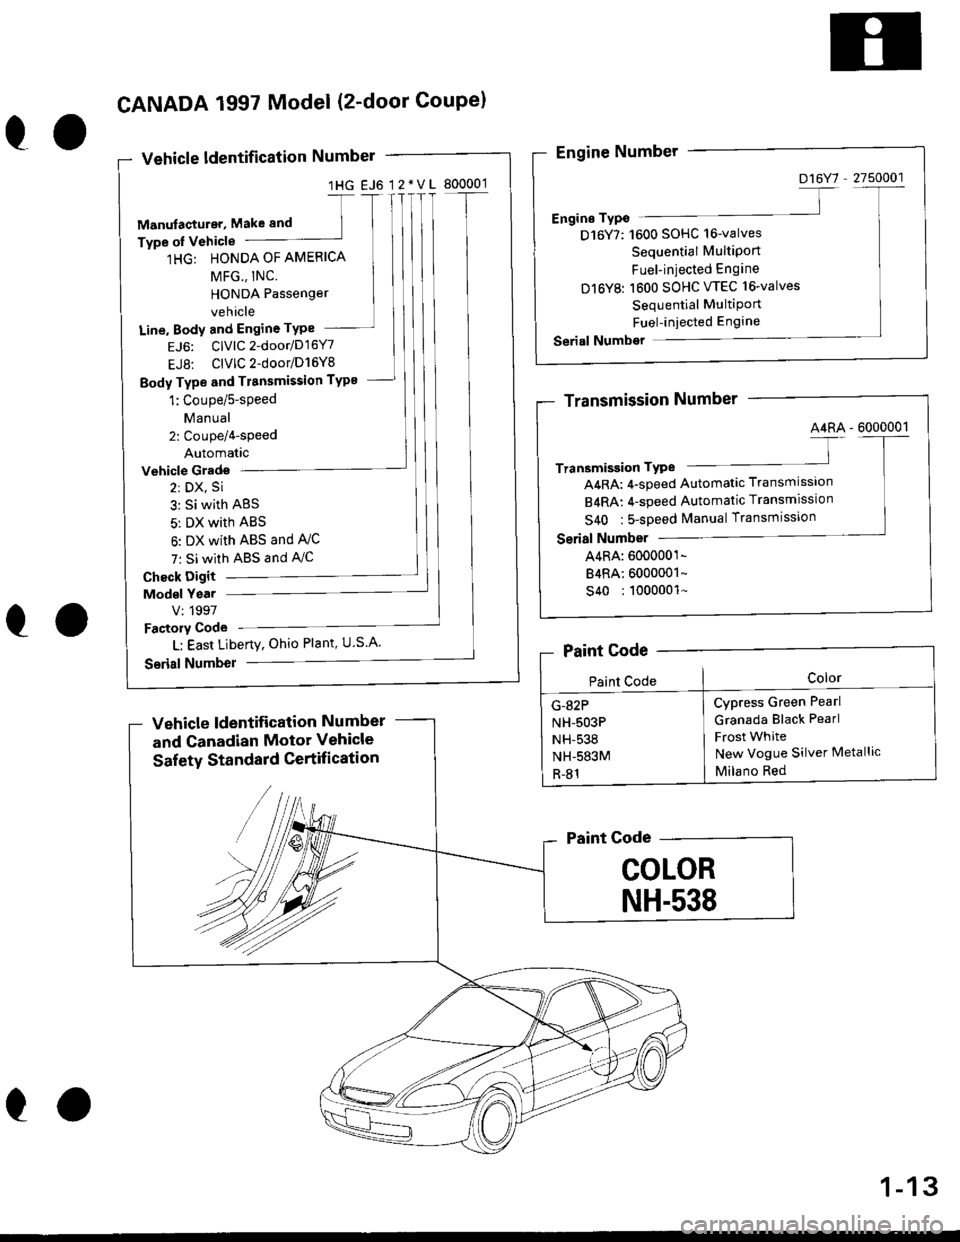 HONDA CIVIC 1996 6.G User Guide 1HG EJ6 12*VL 800001
1HG: HONDA OF AMERICA
Line, Body and Engine TYPe
EJ6: ClvlC2-door/D16Y7
EJ8: ClVlC2-door/D16Y8
Body Type and Tr8nsmission TYP8
Vehicle Grado
2: DX, Si
3: Si with ABS
5: DX with AB